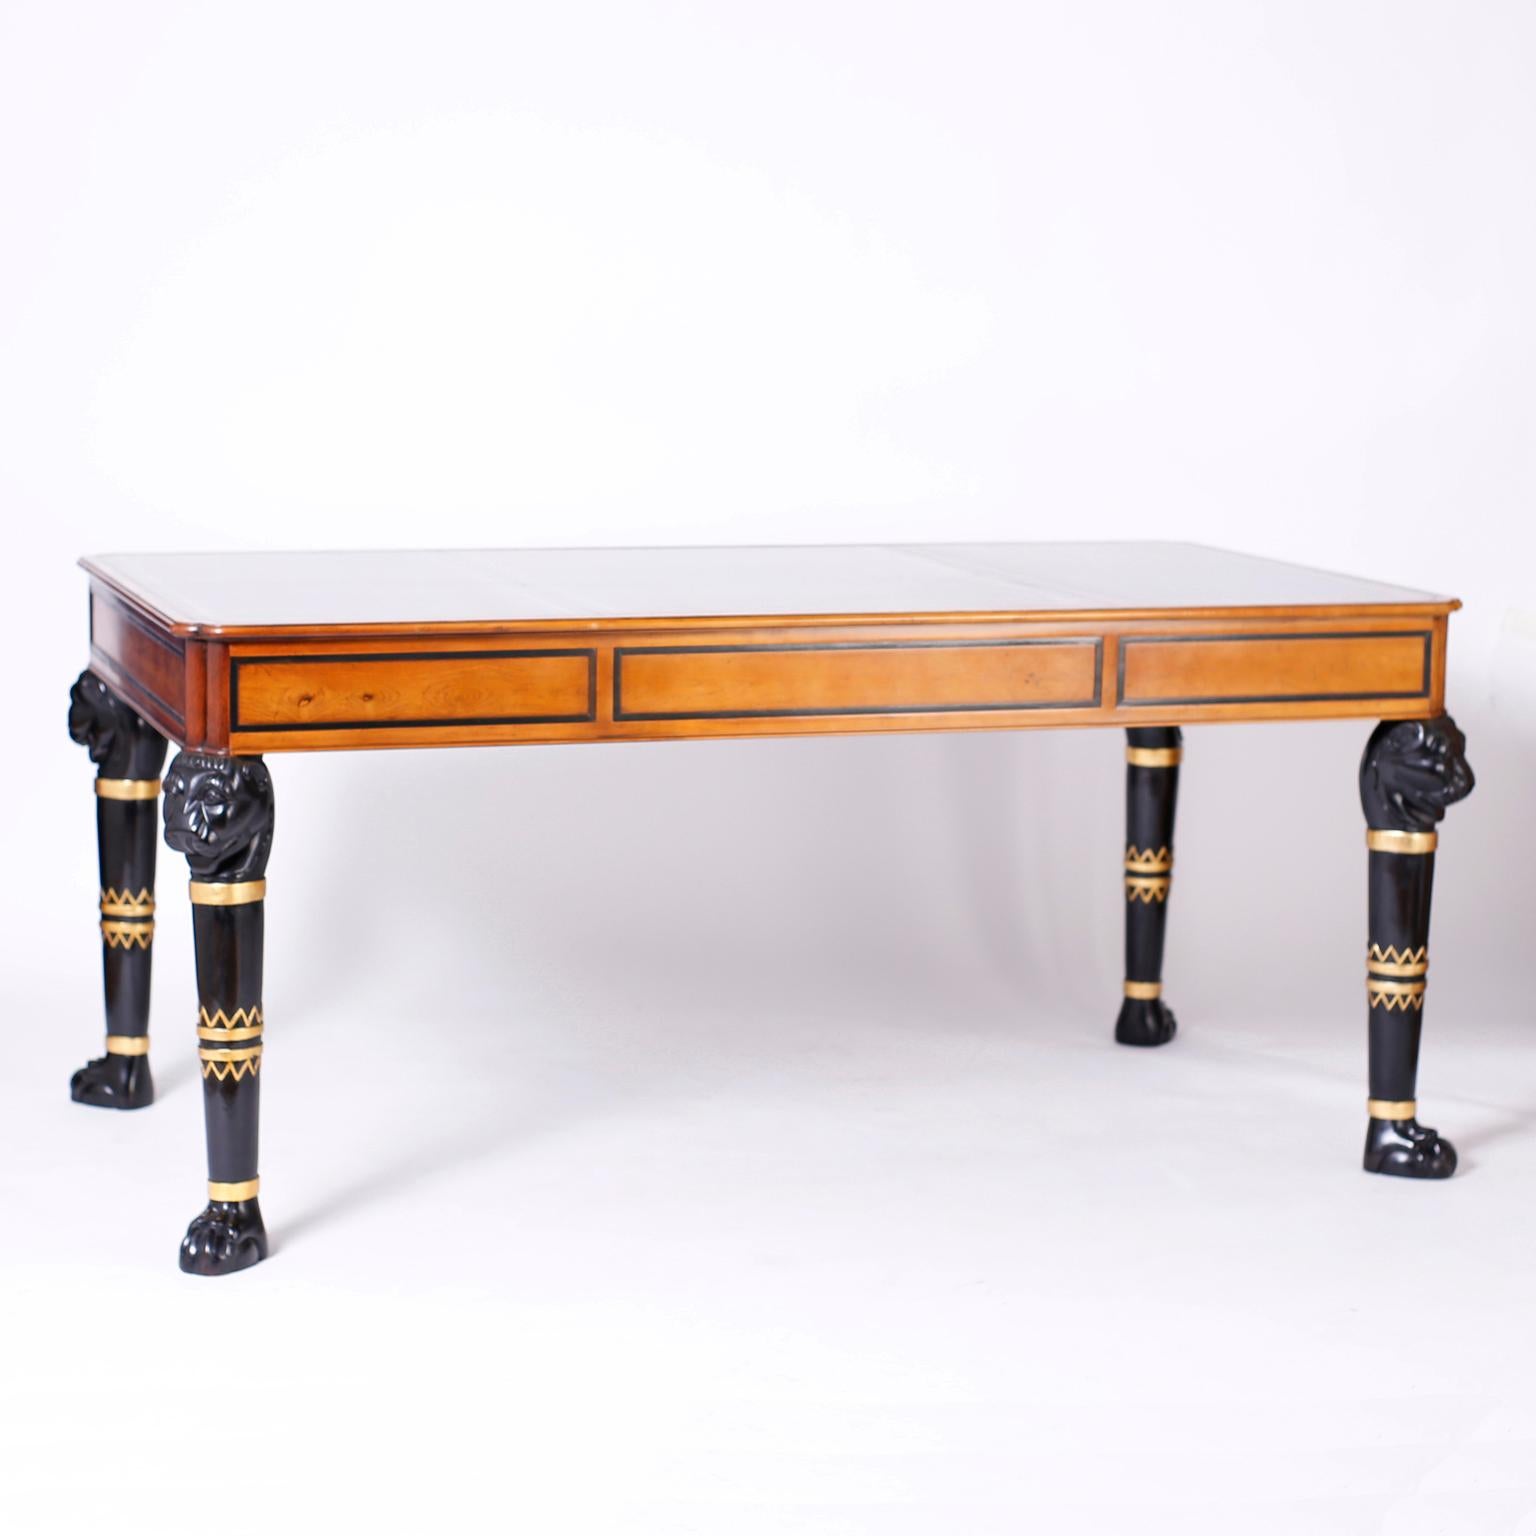 Egyptian Revival Neoclassical Style Leather Top Desk In Good Condition For Sale In Palm Beach, FL